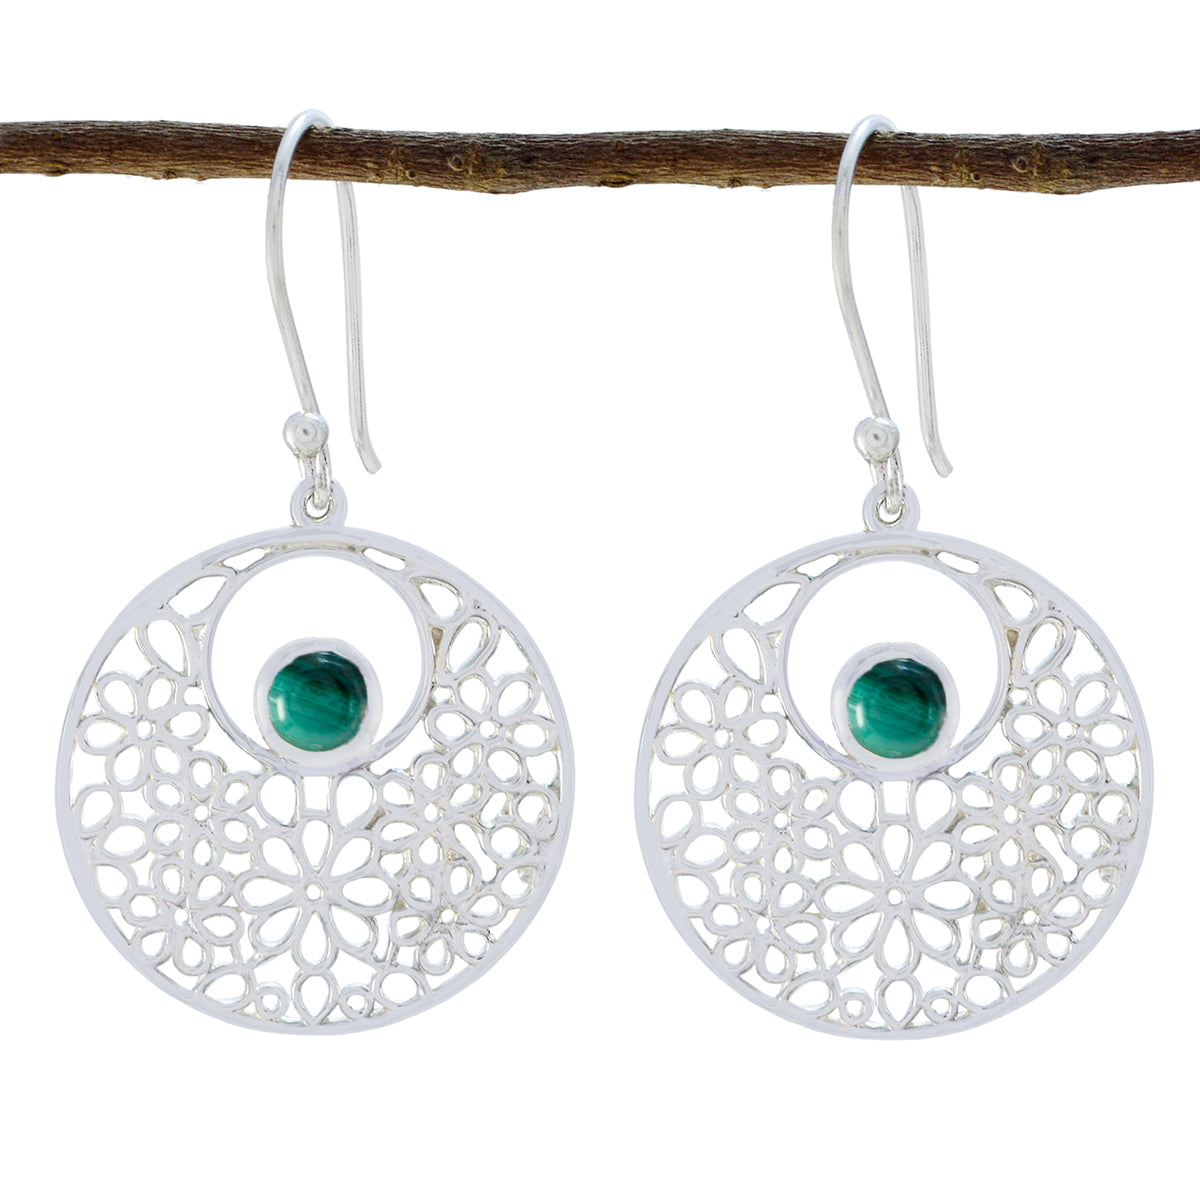 Riyo Nice Gemstone round Cabochon Green Malachatie Silver Earring gift for mother's day